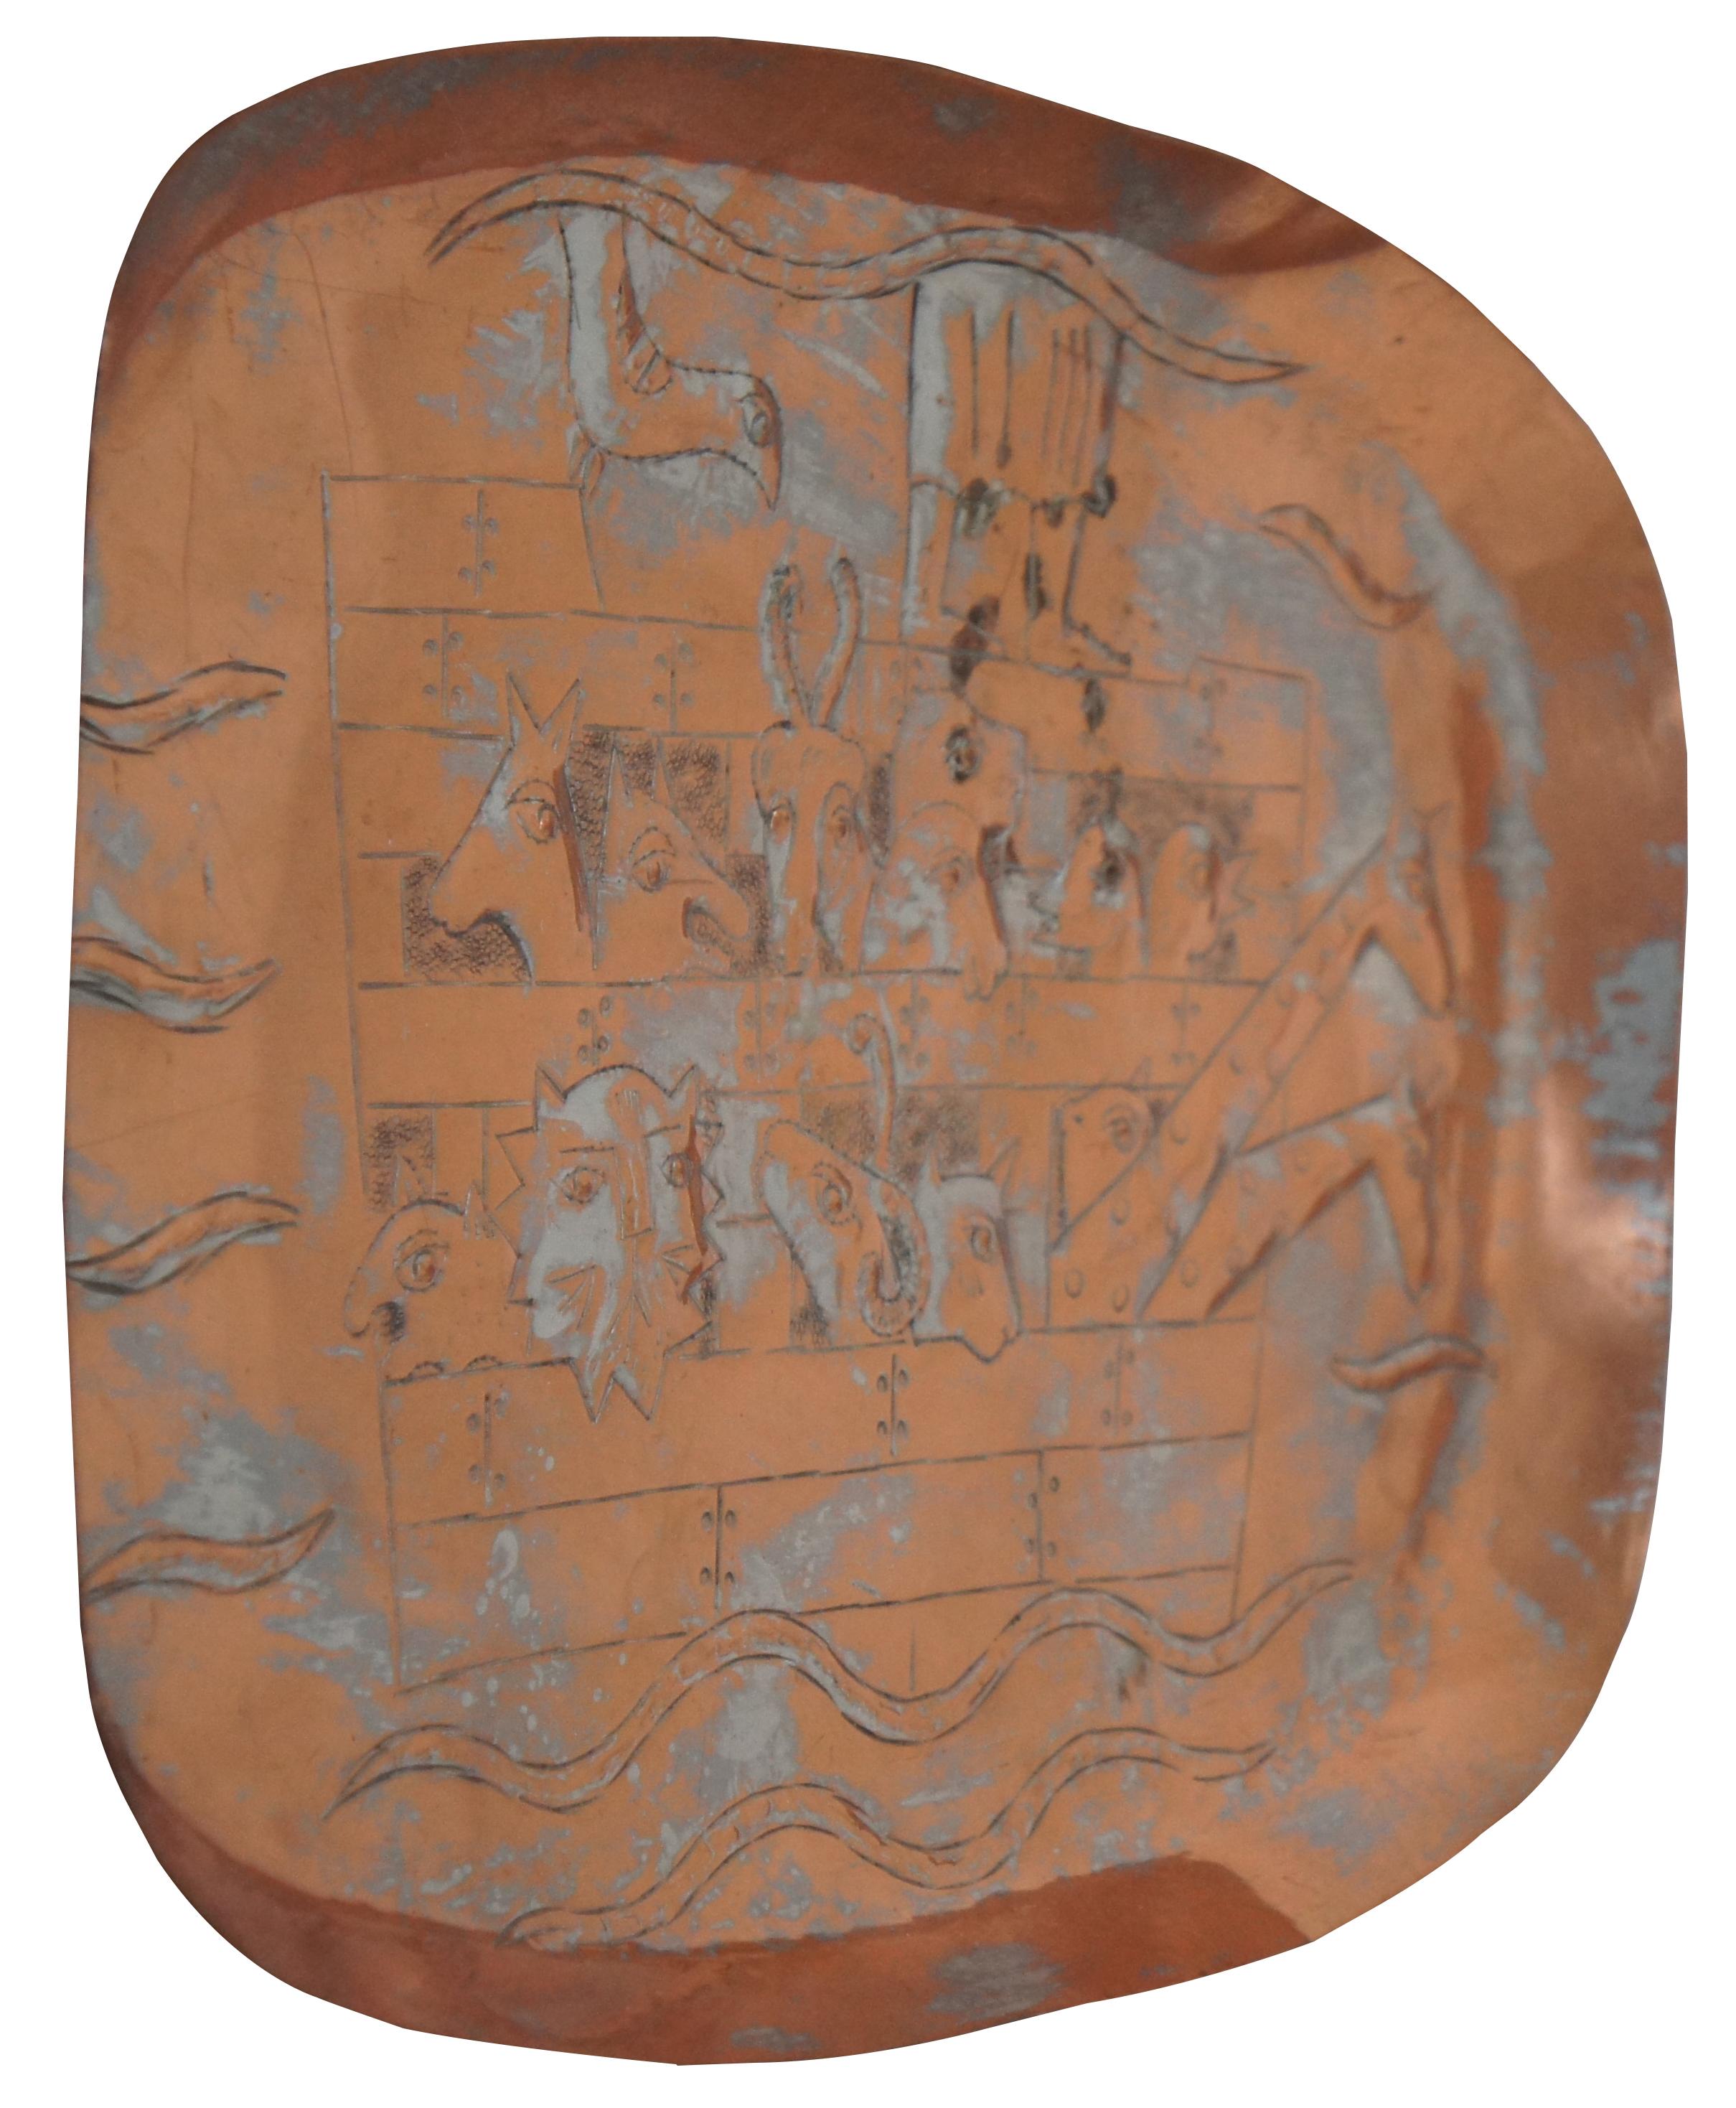 Rustic Vintage Israeli Messica Eetched Copper Noahs Ark Animal Tray Platter Judaica For Sale